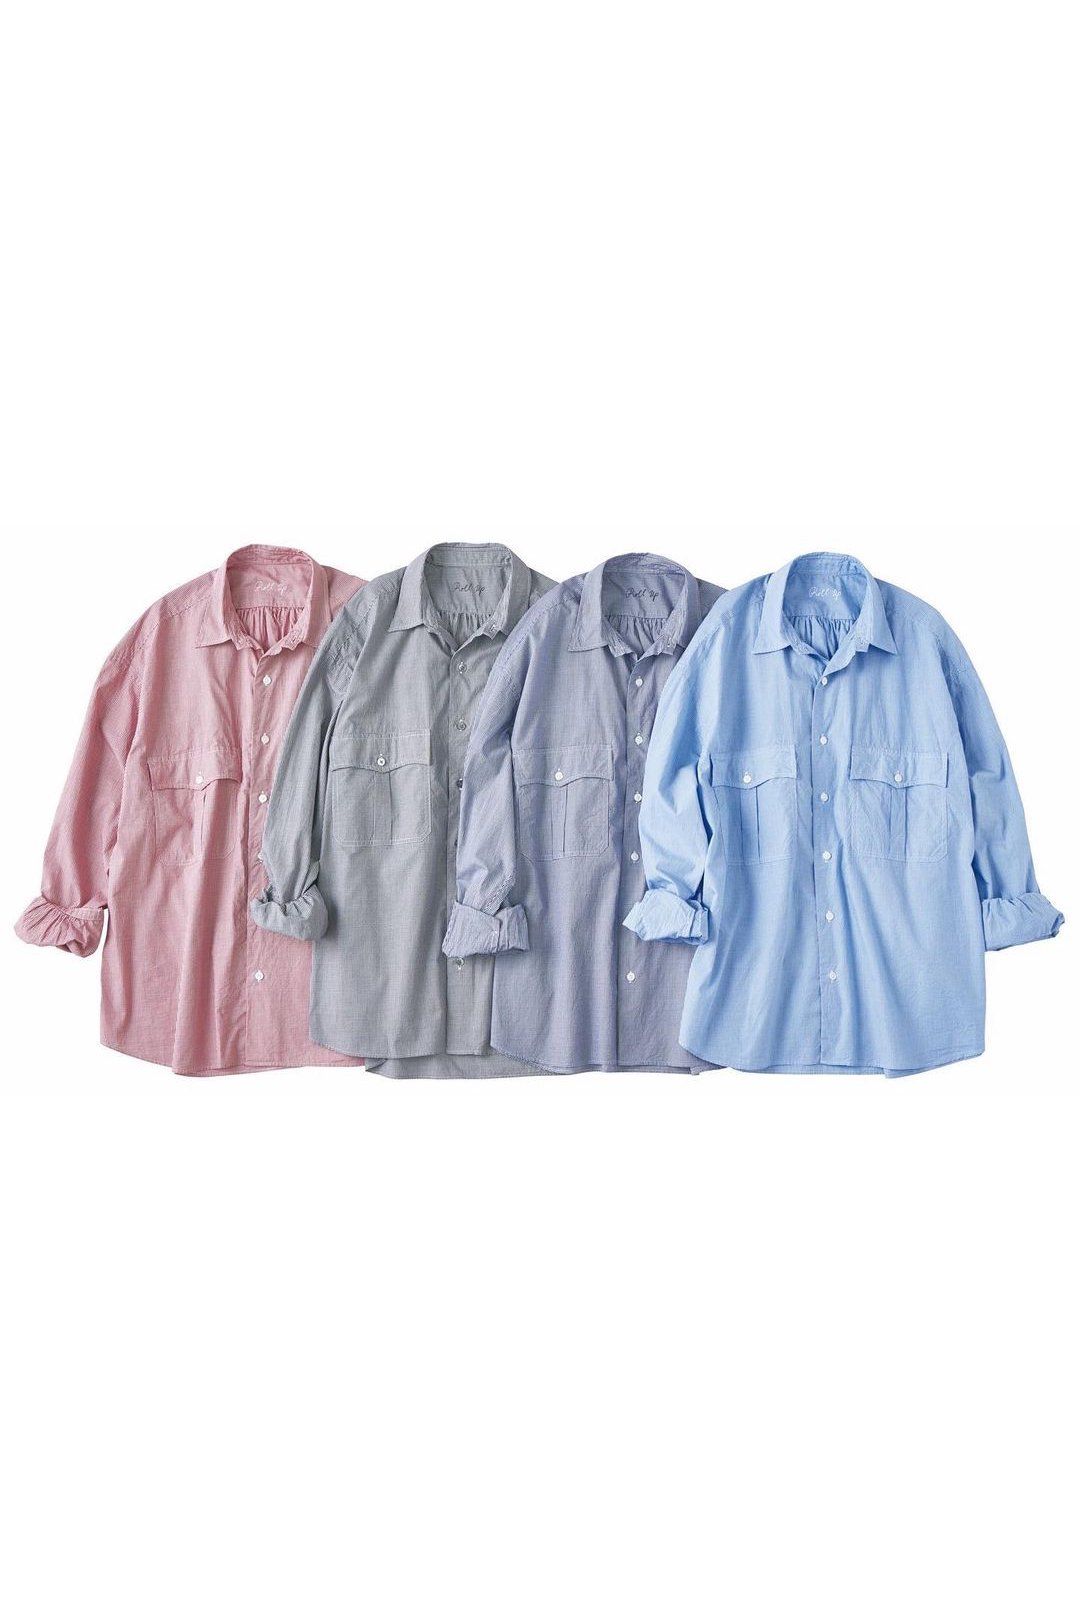 ROLL UP NEW GINGHAM CHECK SHIRT - Blue - S